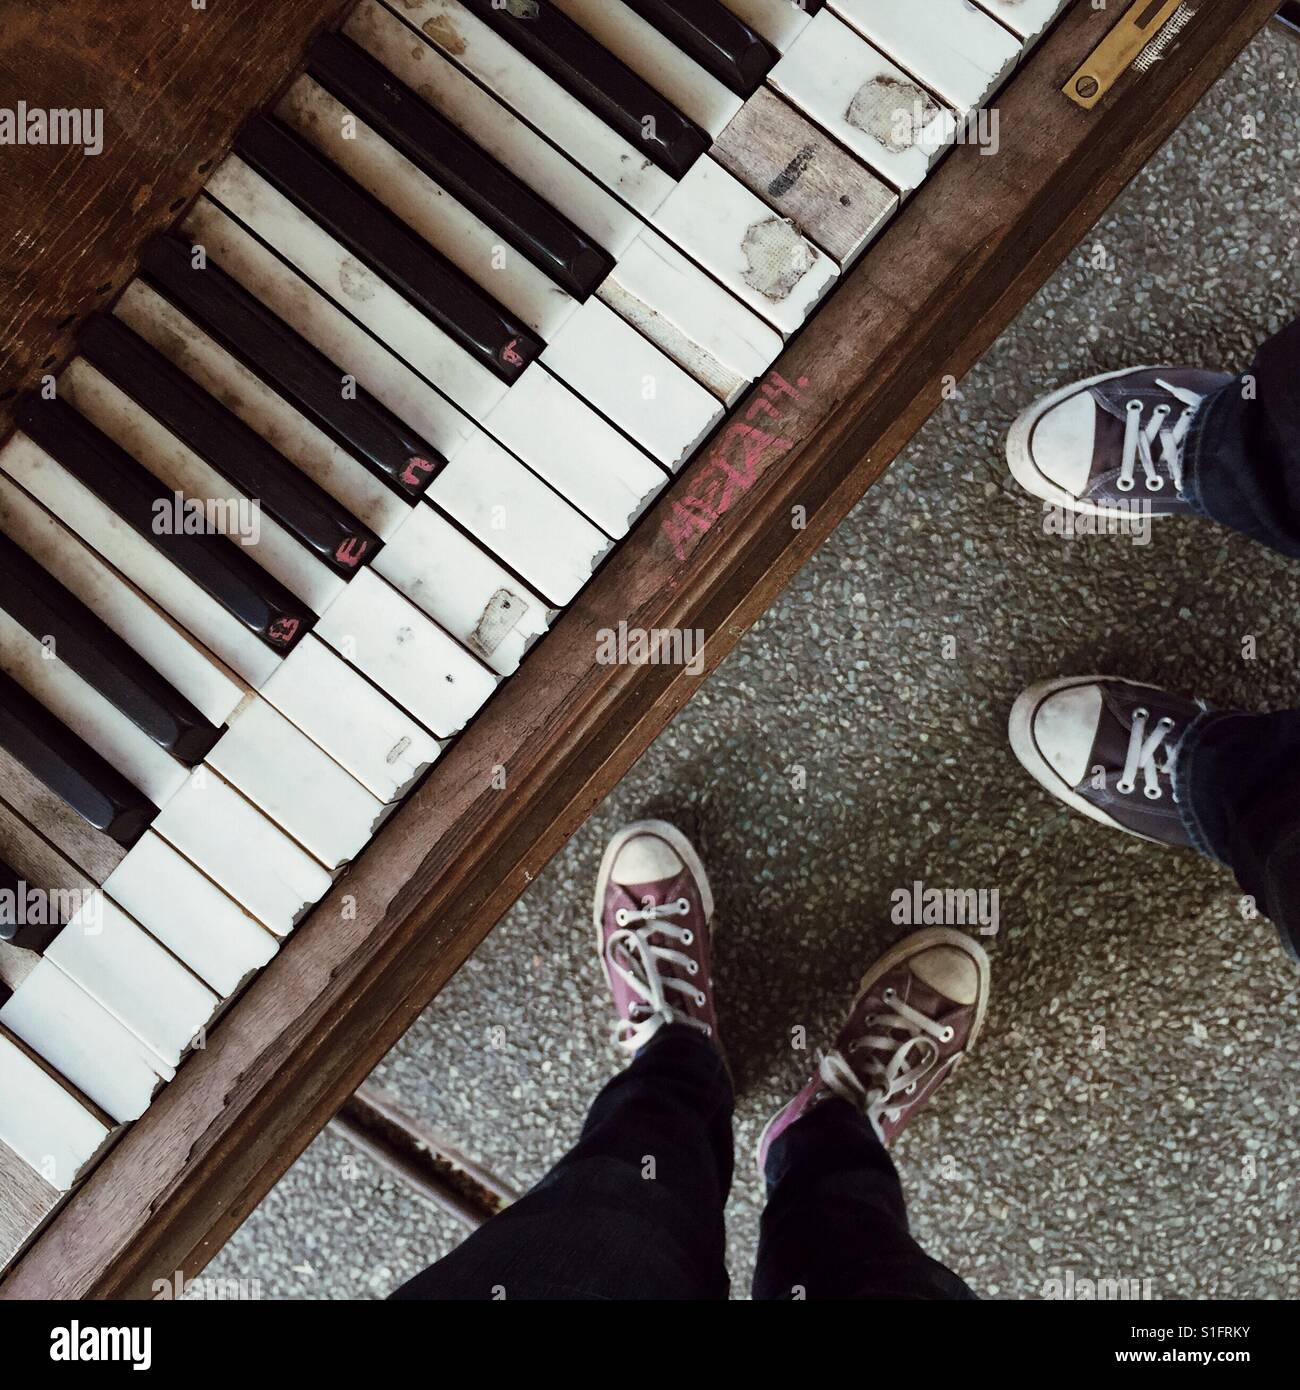 A male and female standing next to a dilapidated piano Stock Photo